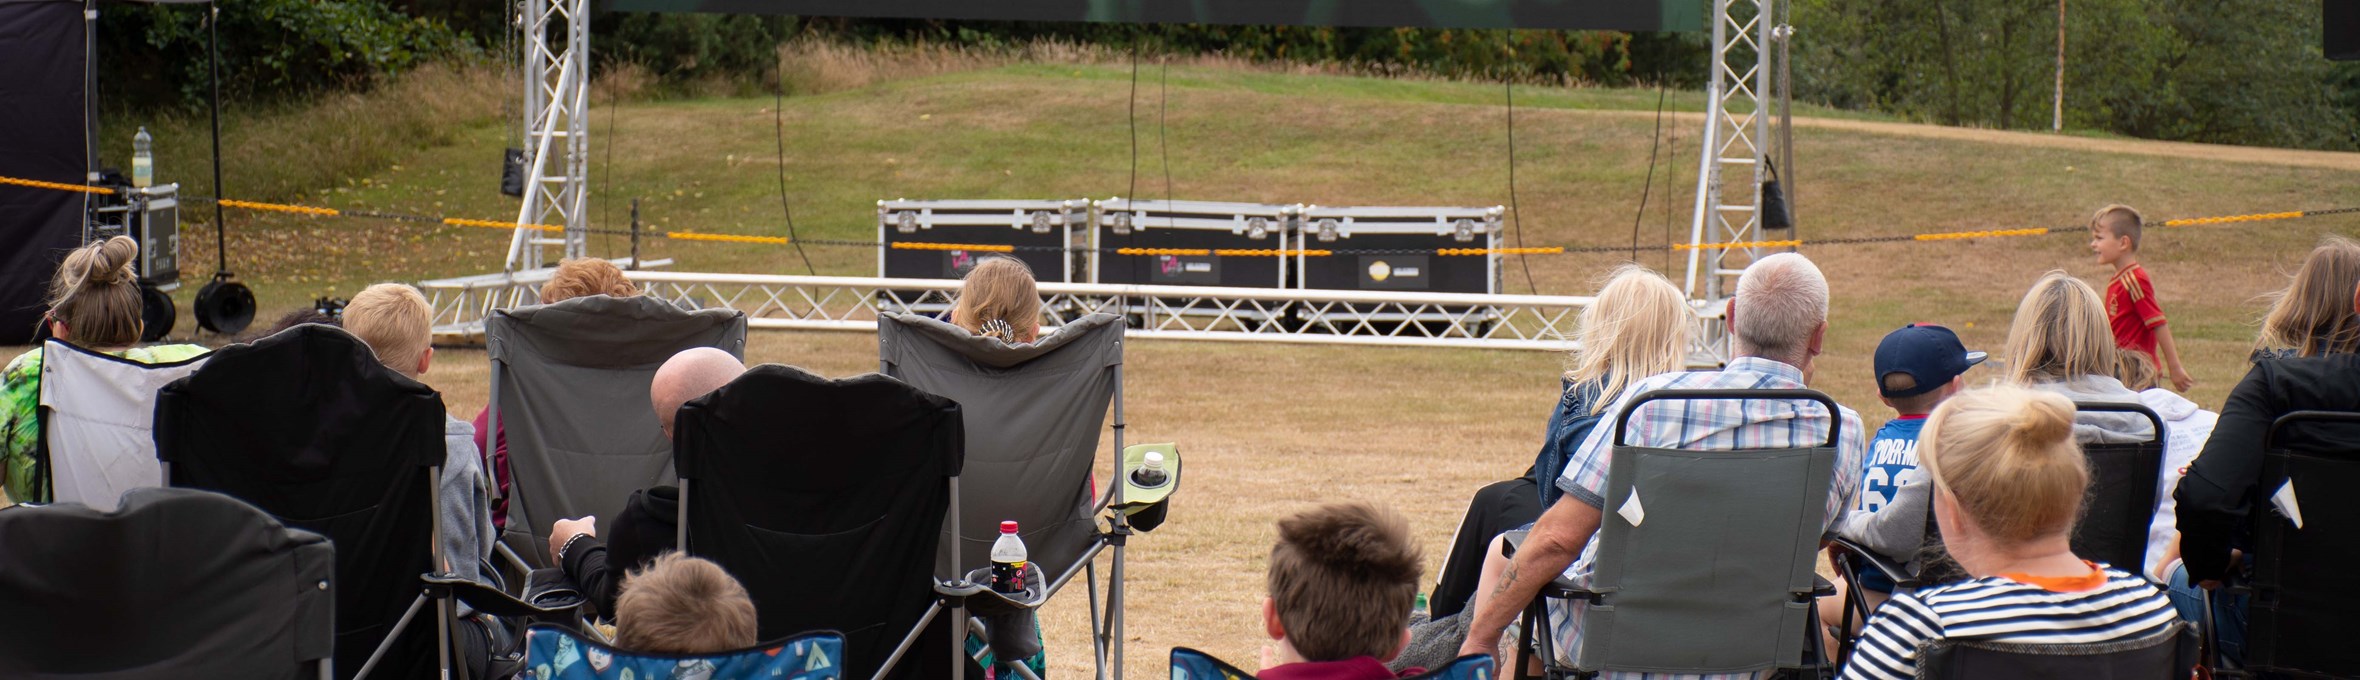 crowds watching the big screen on selston country park 